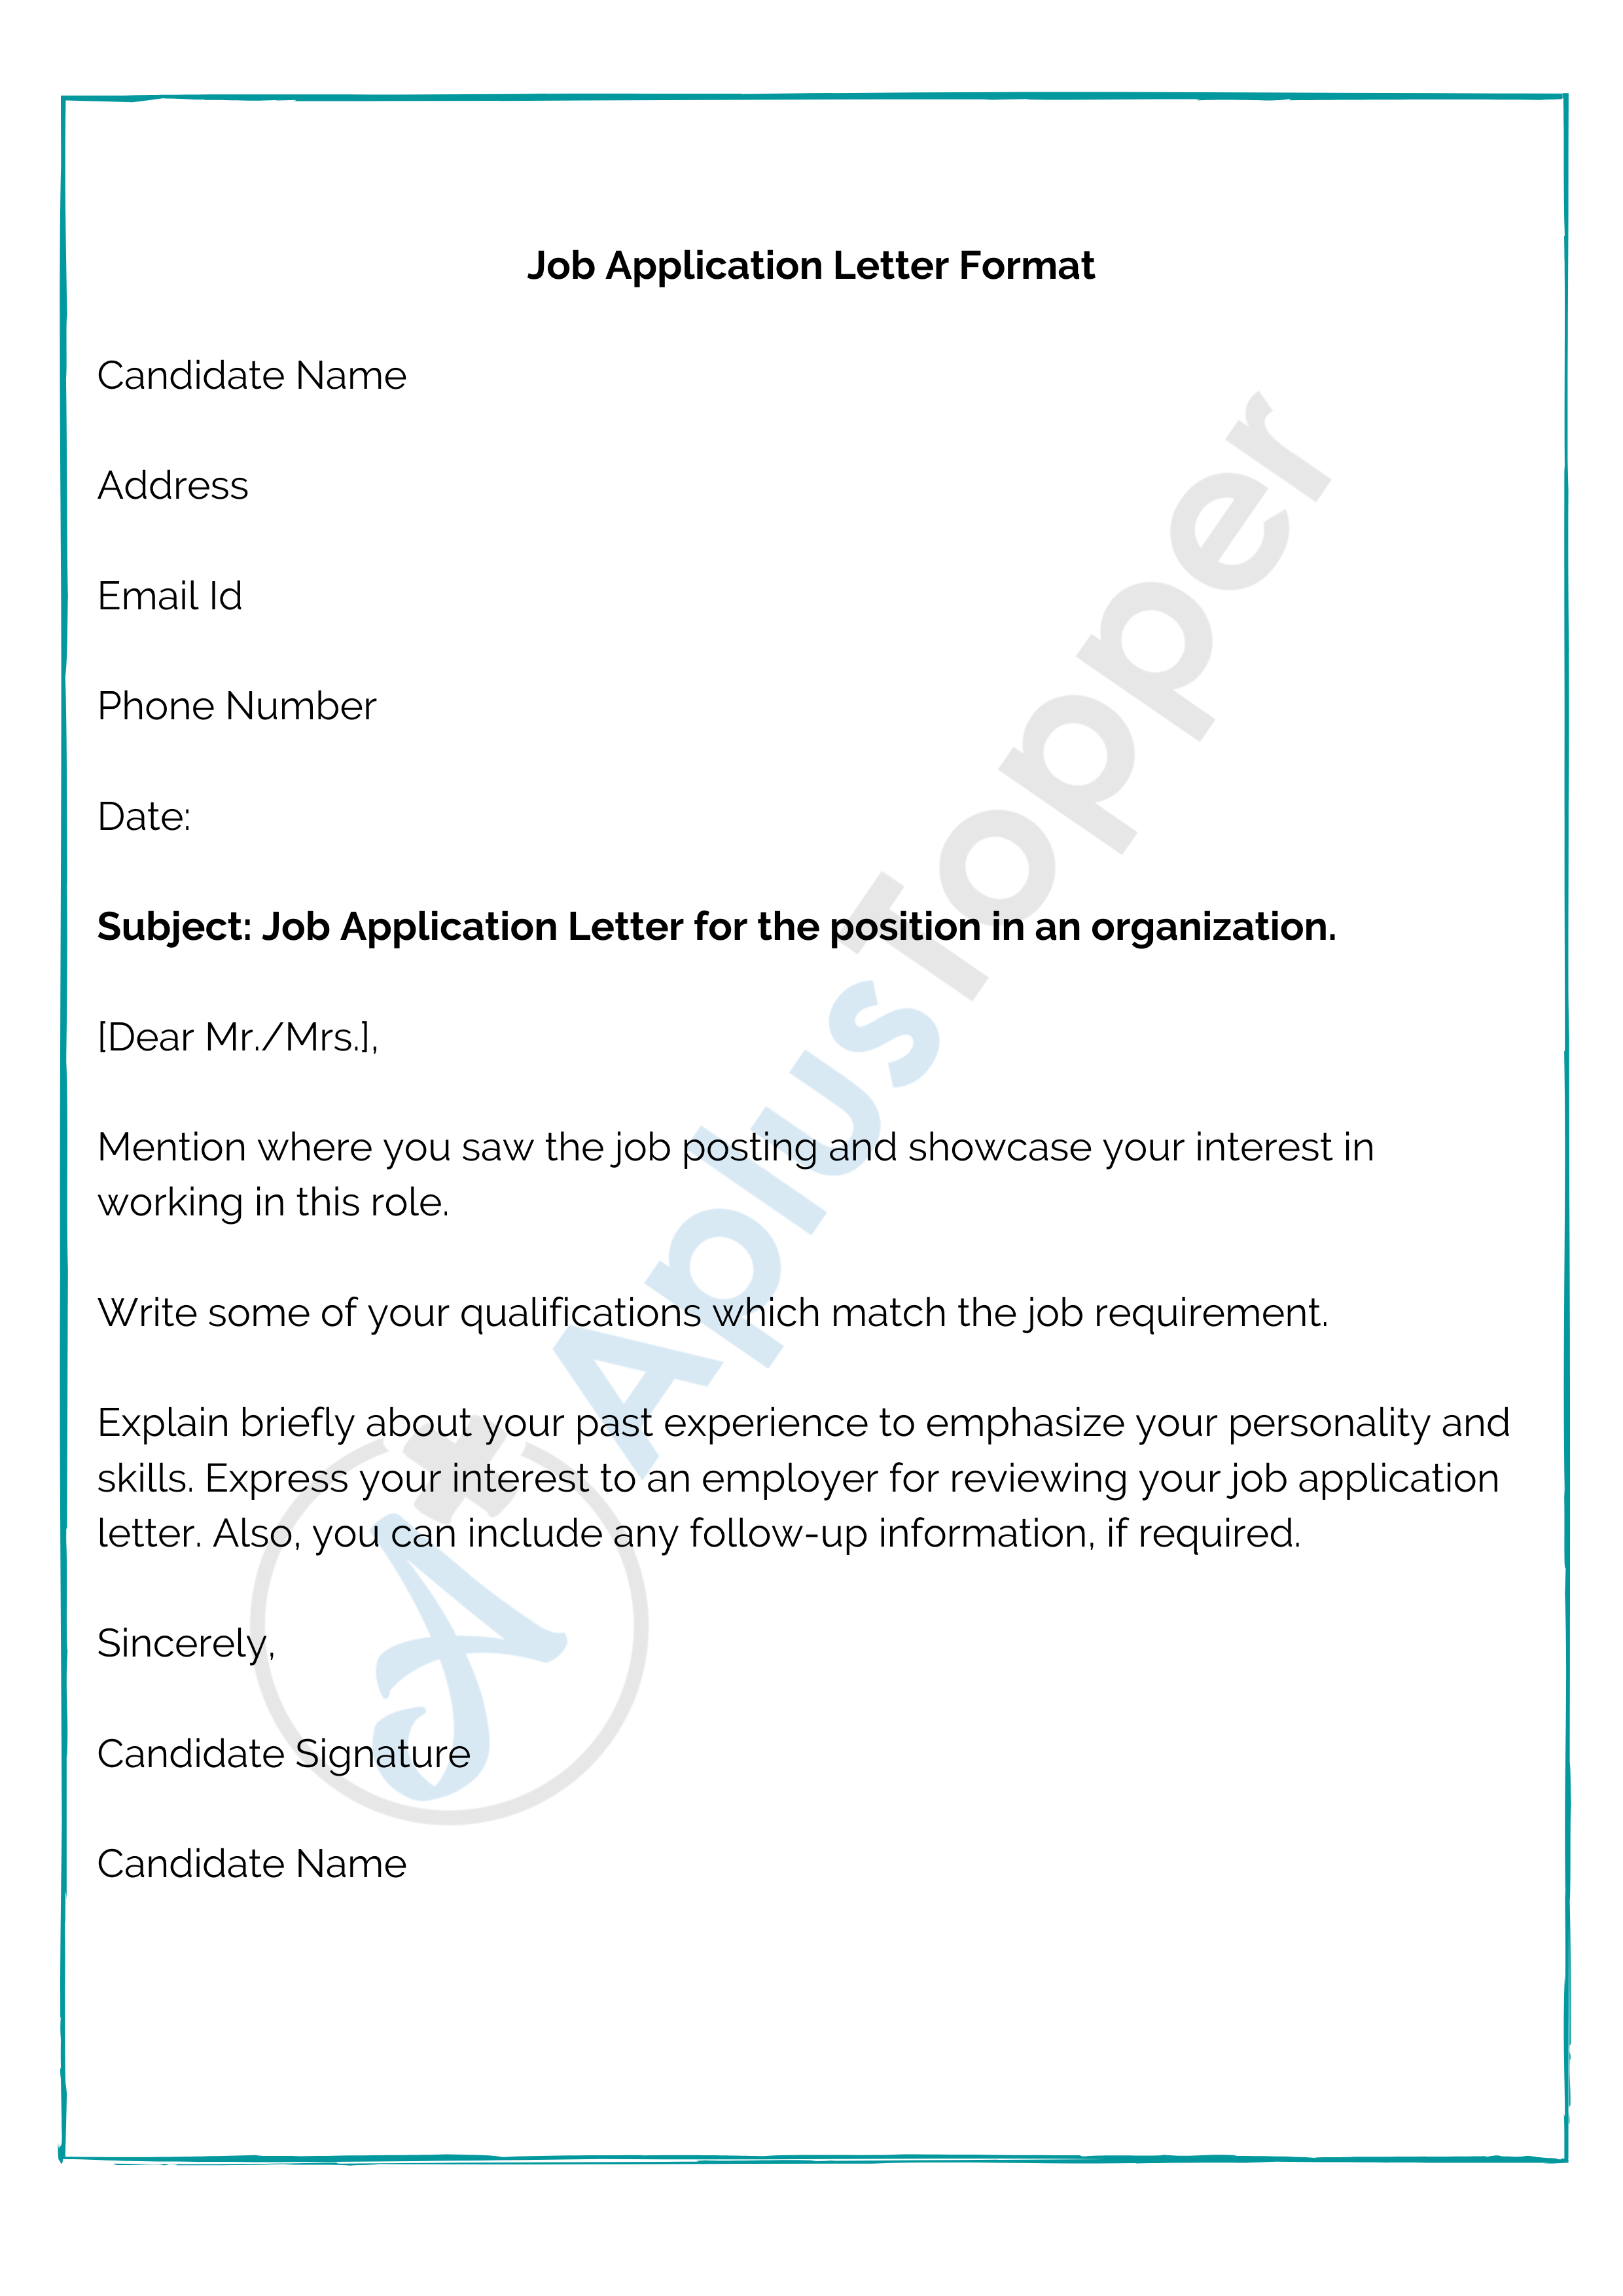 how to write the best job application letter